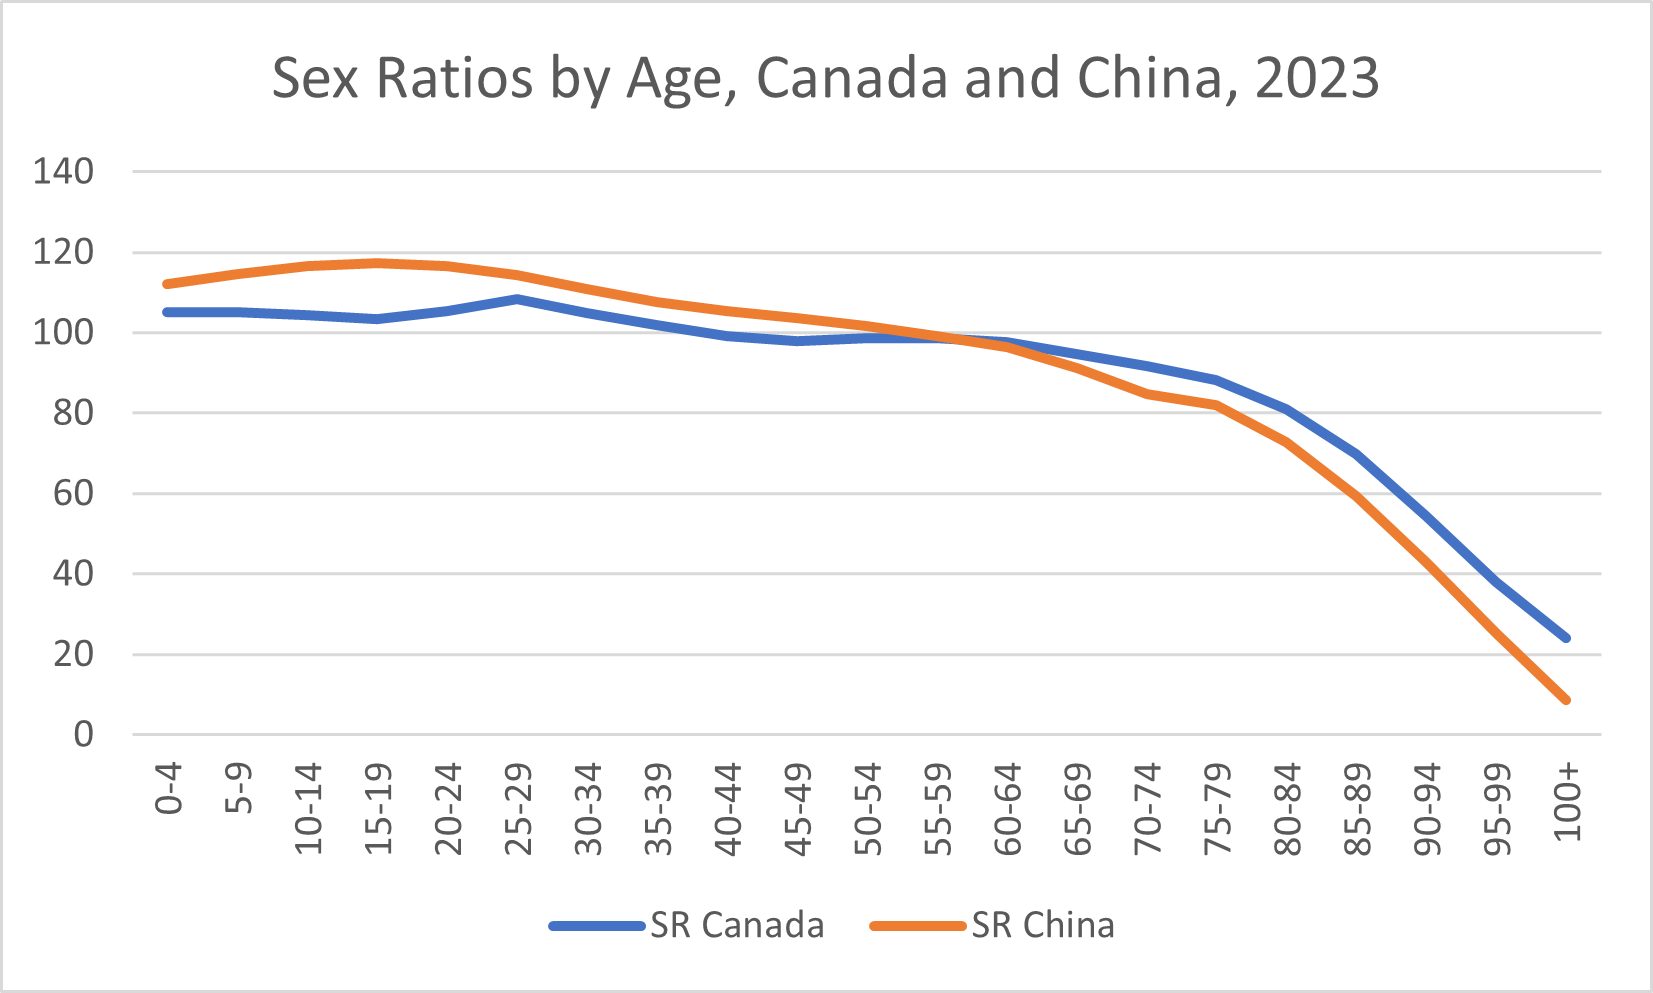 This graph shows the 2023 sex ratio (vertical axis) by age (horizontal axis) for both Canada and China. At age category 0-4 the sex ratio is higher in China than in Canada. The gap actually widens, achieving its biggest gap for 15-19 year olds. It then narrows. By ages 25-29 both sex ratios are declining. At age 55-59 Canada and China have the same sex ratio of 100 women to 100 men. After that, the sex ratio in both countries declines and is less that 100, but Canada's sex ratio remains higher than China's.